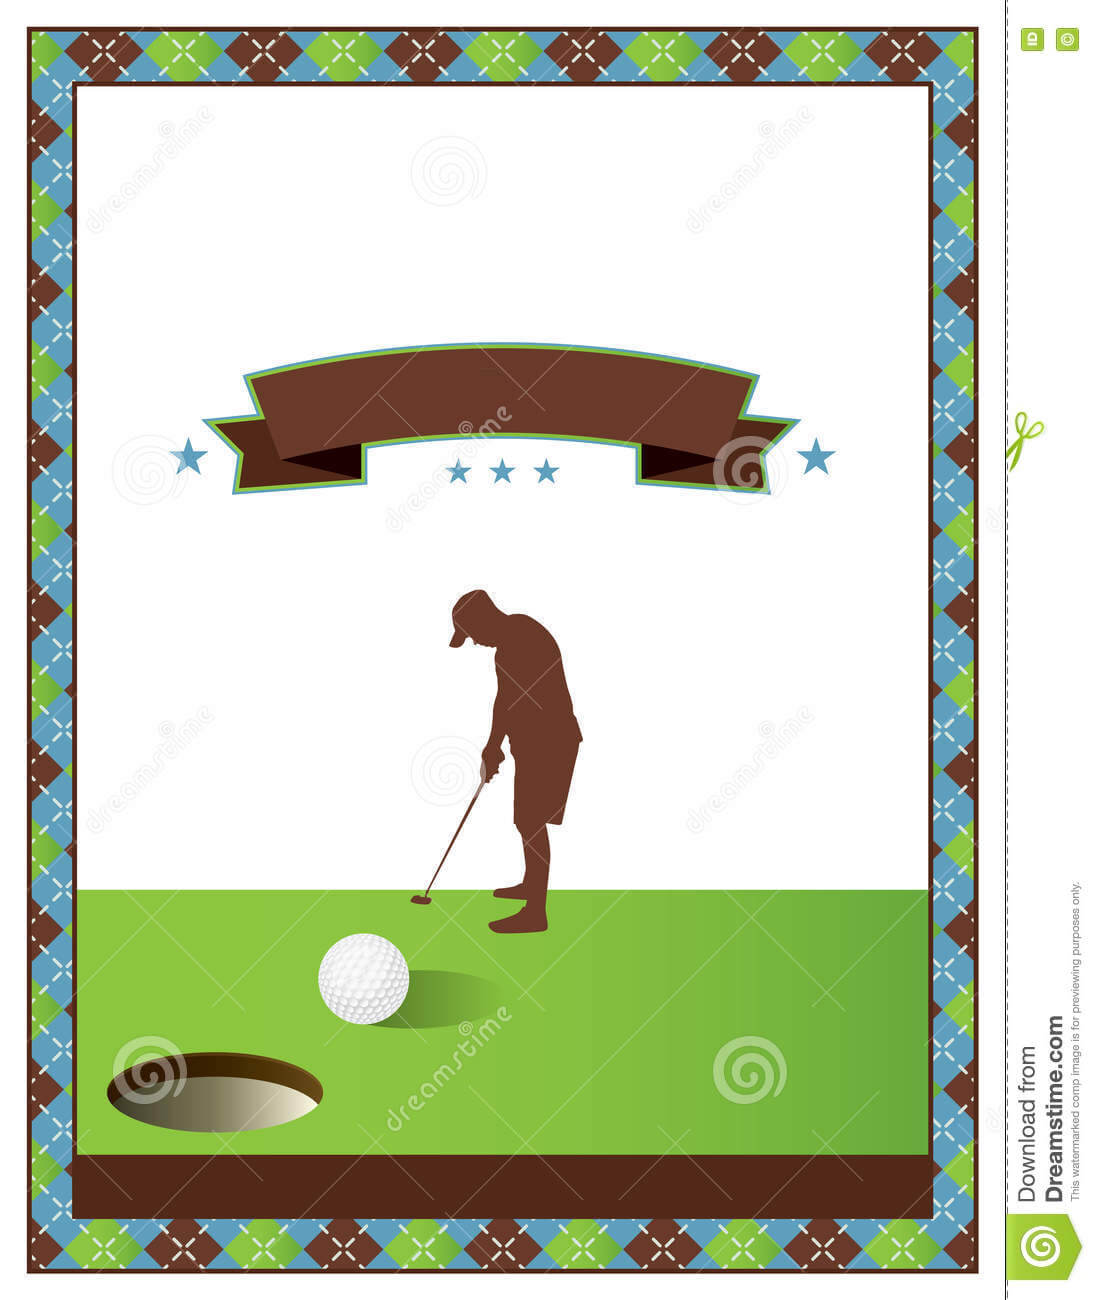 Blank Golf Tournament Flyer Template Stock Vector For Blank Templates For Flyers